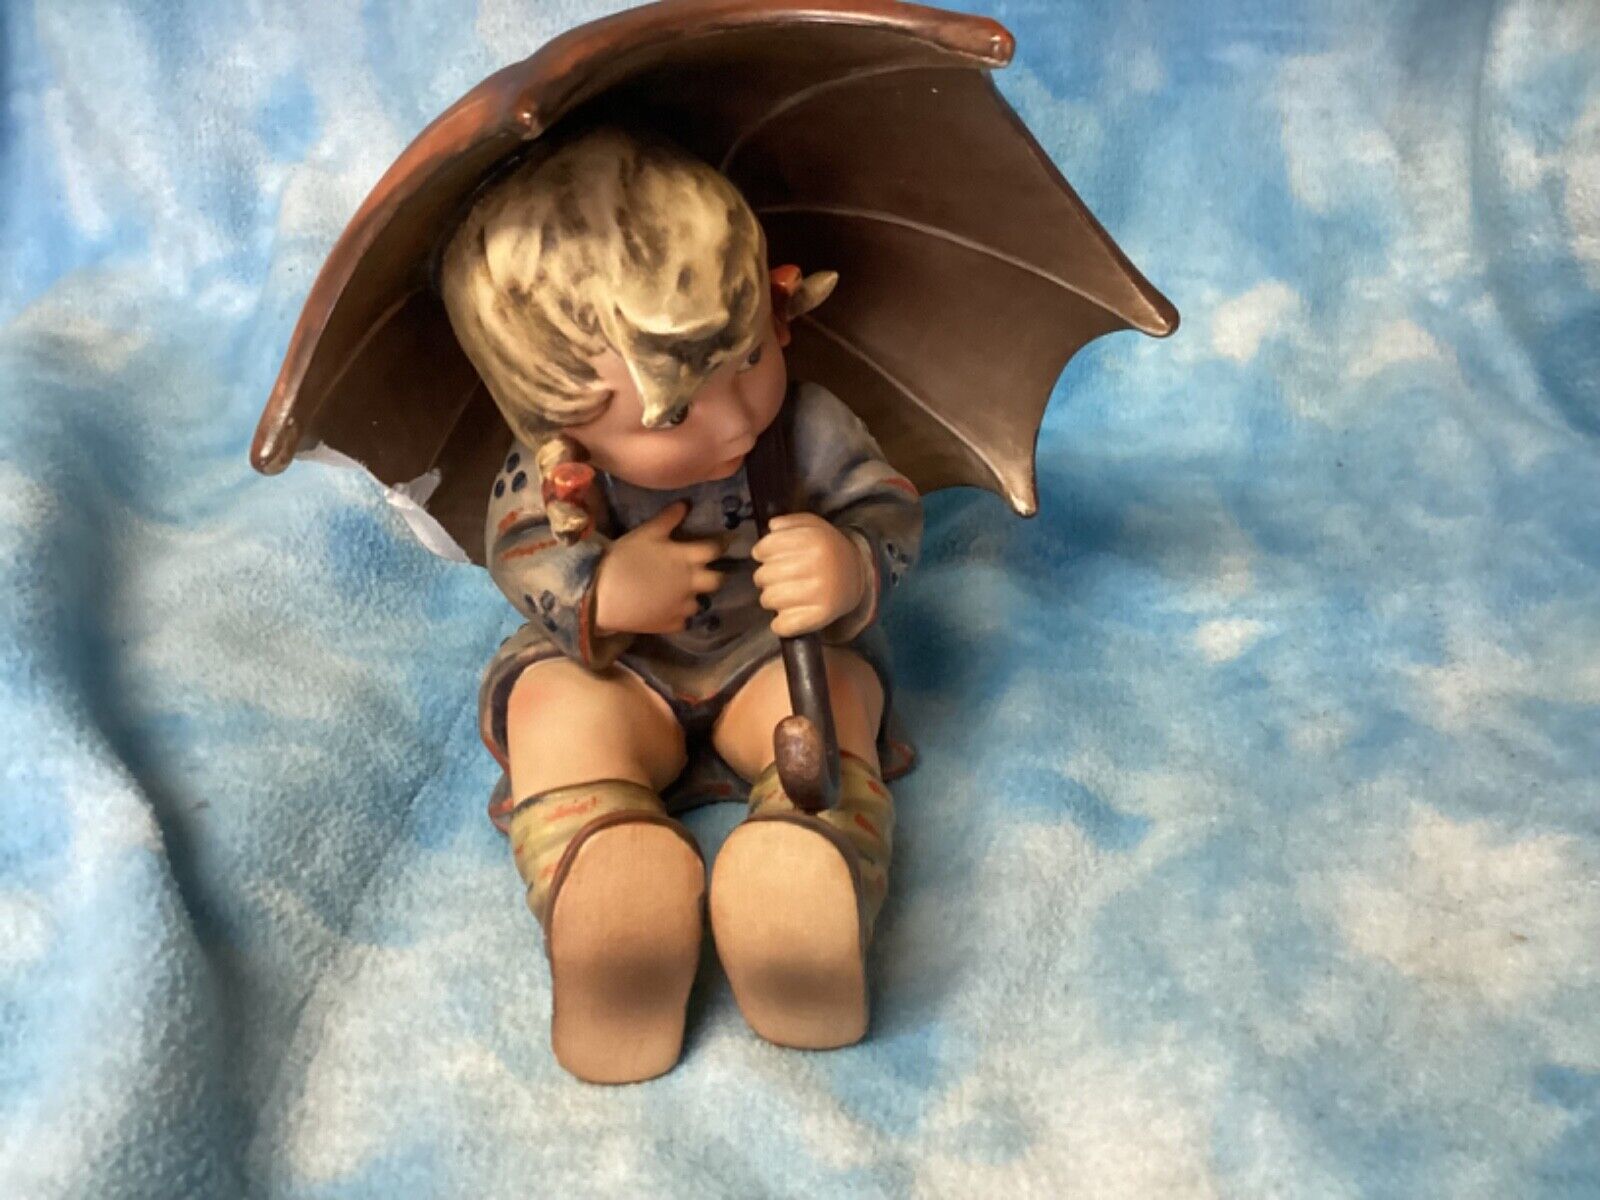 Hummel figurine Umbrella Girl 8 inch See pictures